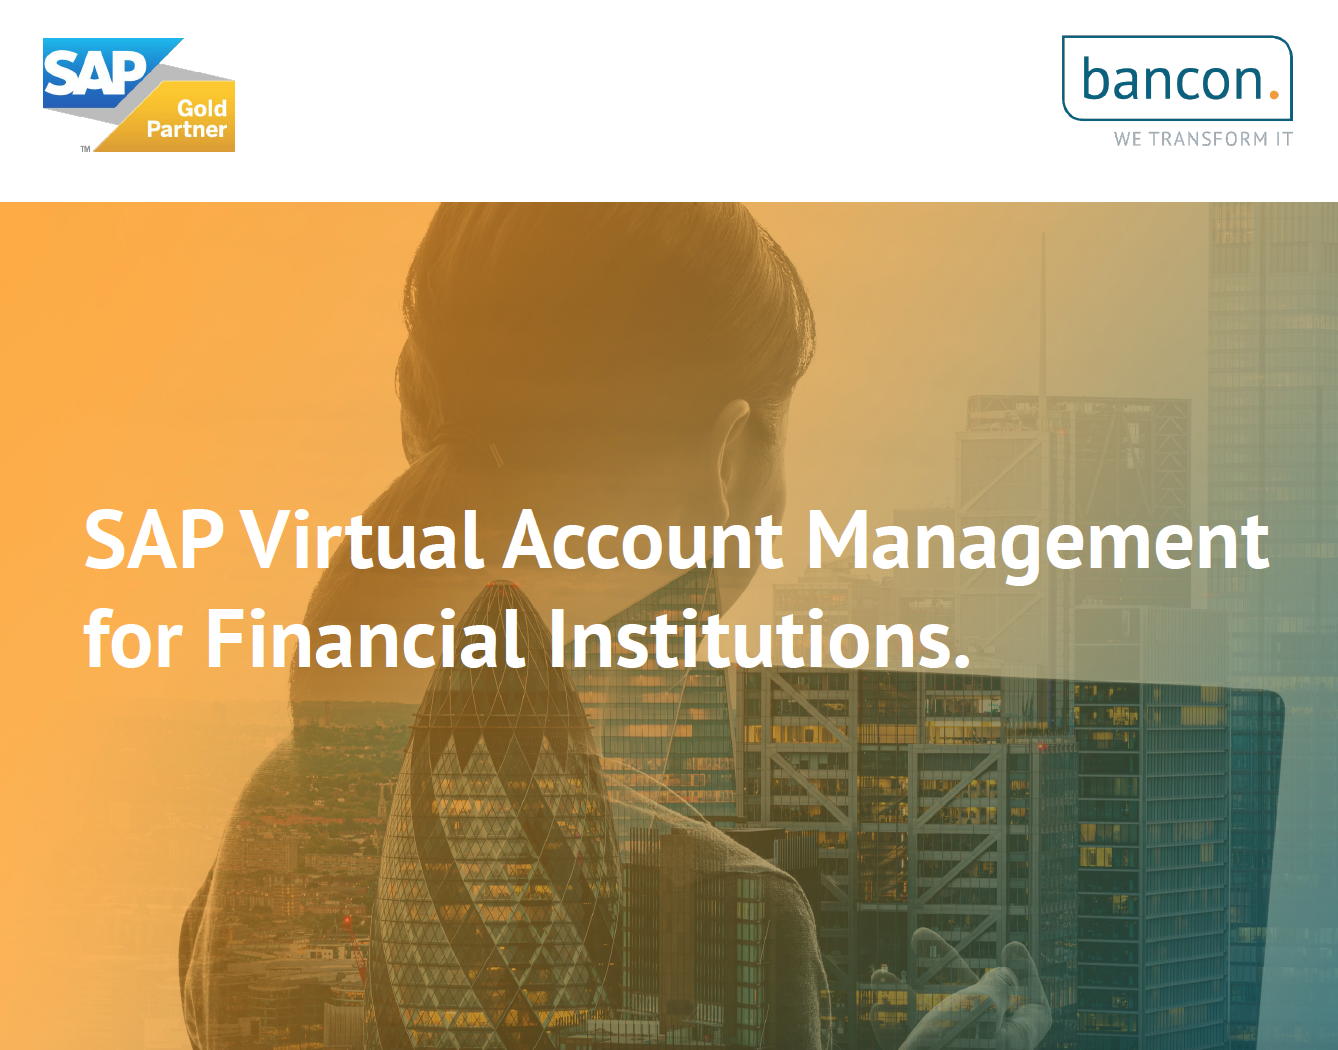 sap-virtual-account-management-for-financial-institutions.md